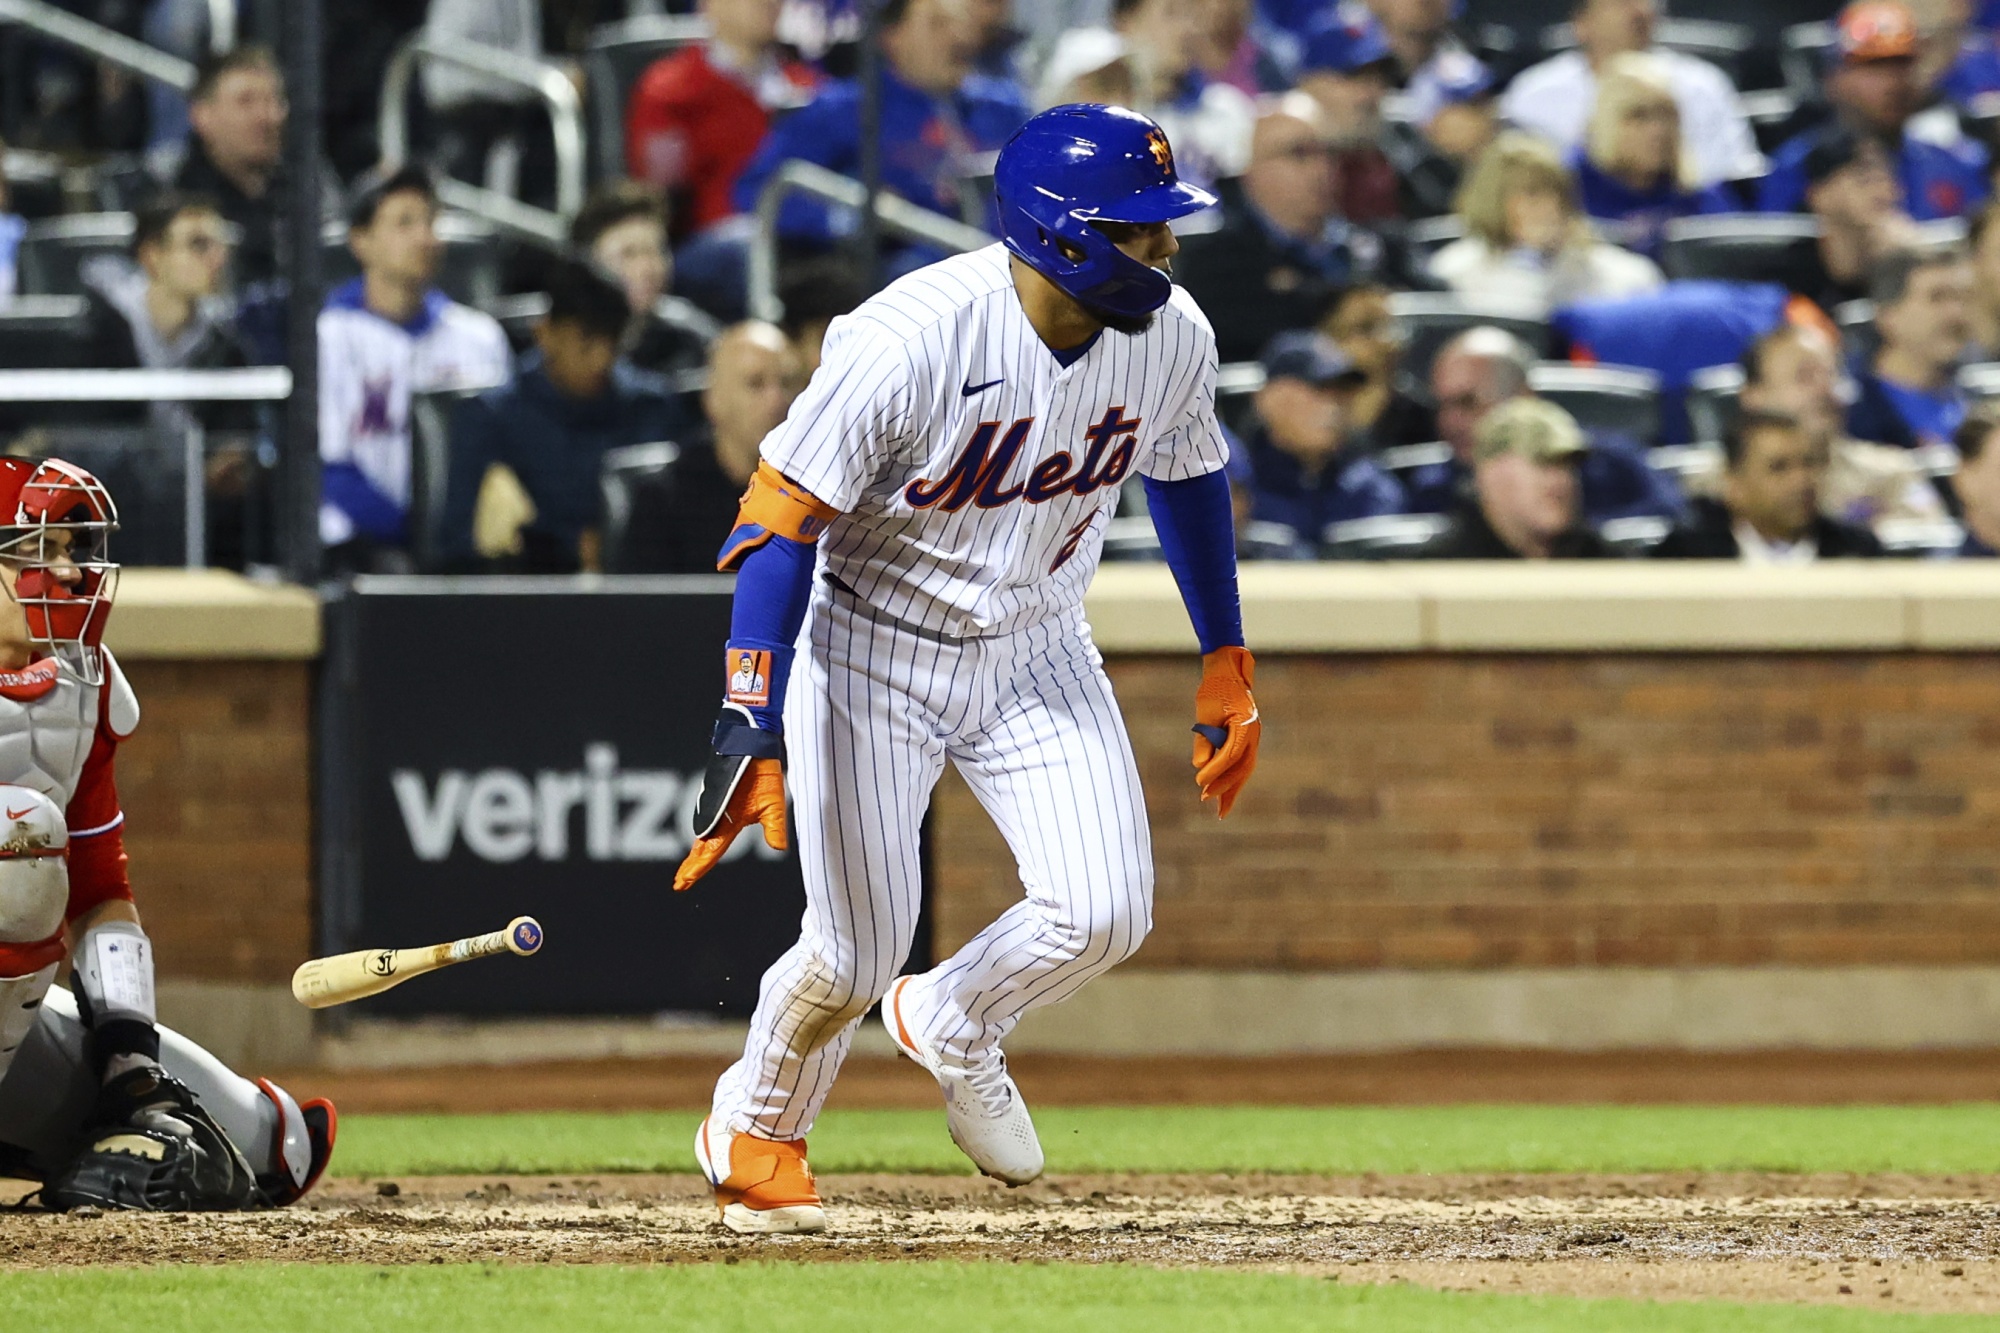 Mets could face roster decision between Dominic Smith, Robinson Cano